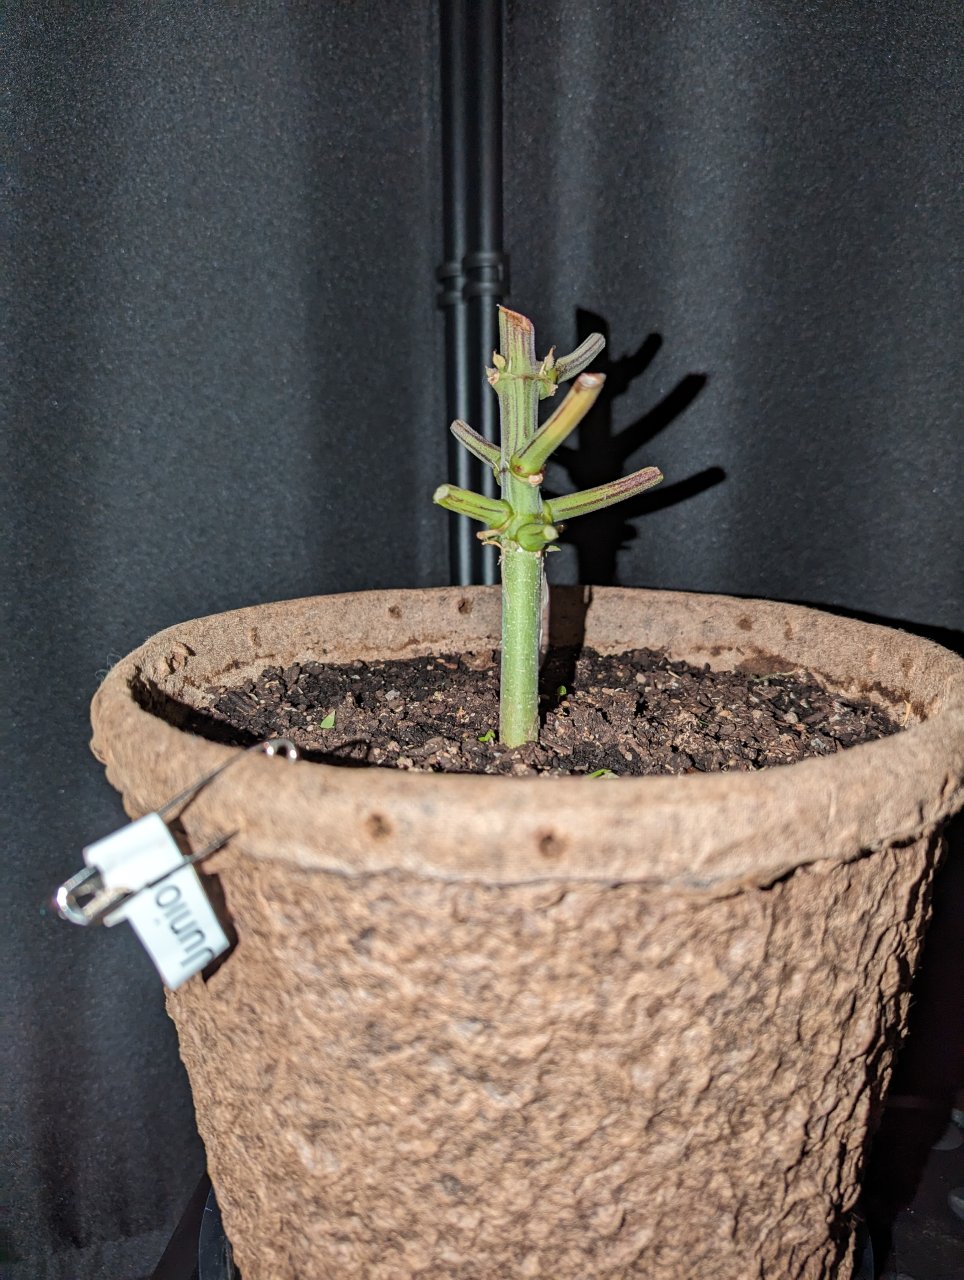 Test of Auto resilience- can this stem survive?